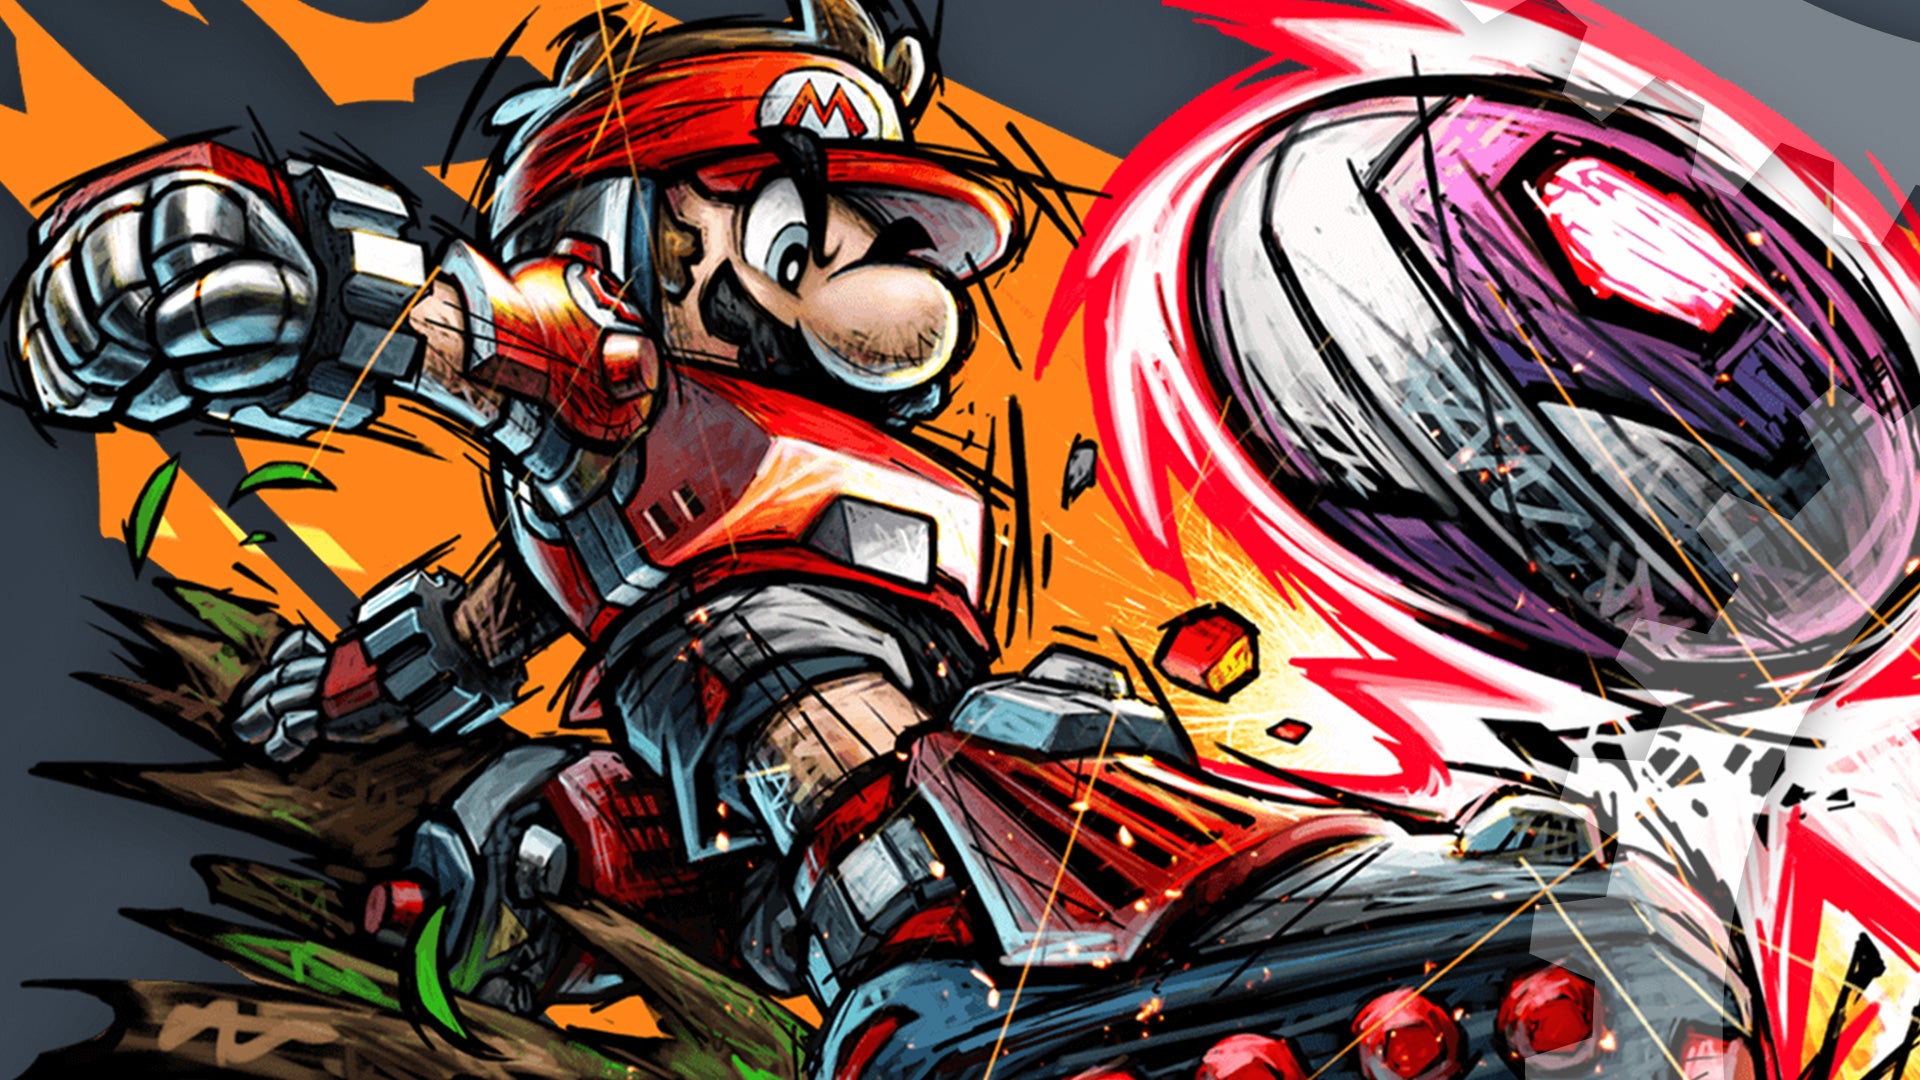 Image for Mario Strikers: Battle League - a technically impressive 1080p60 experience